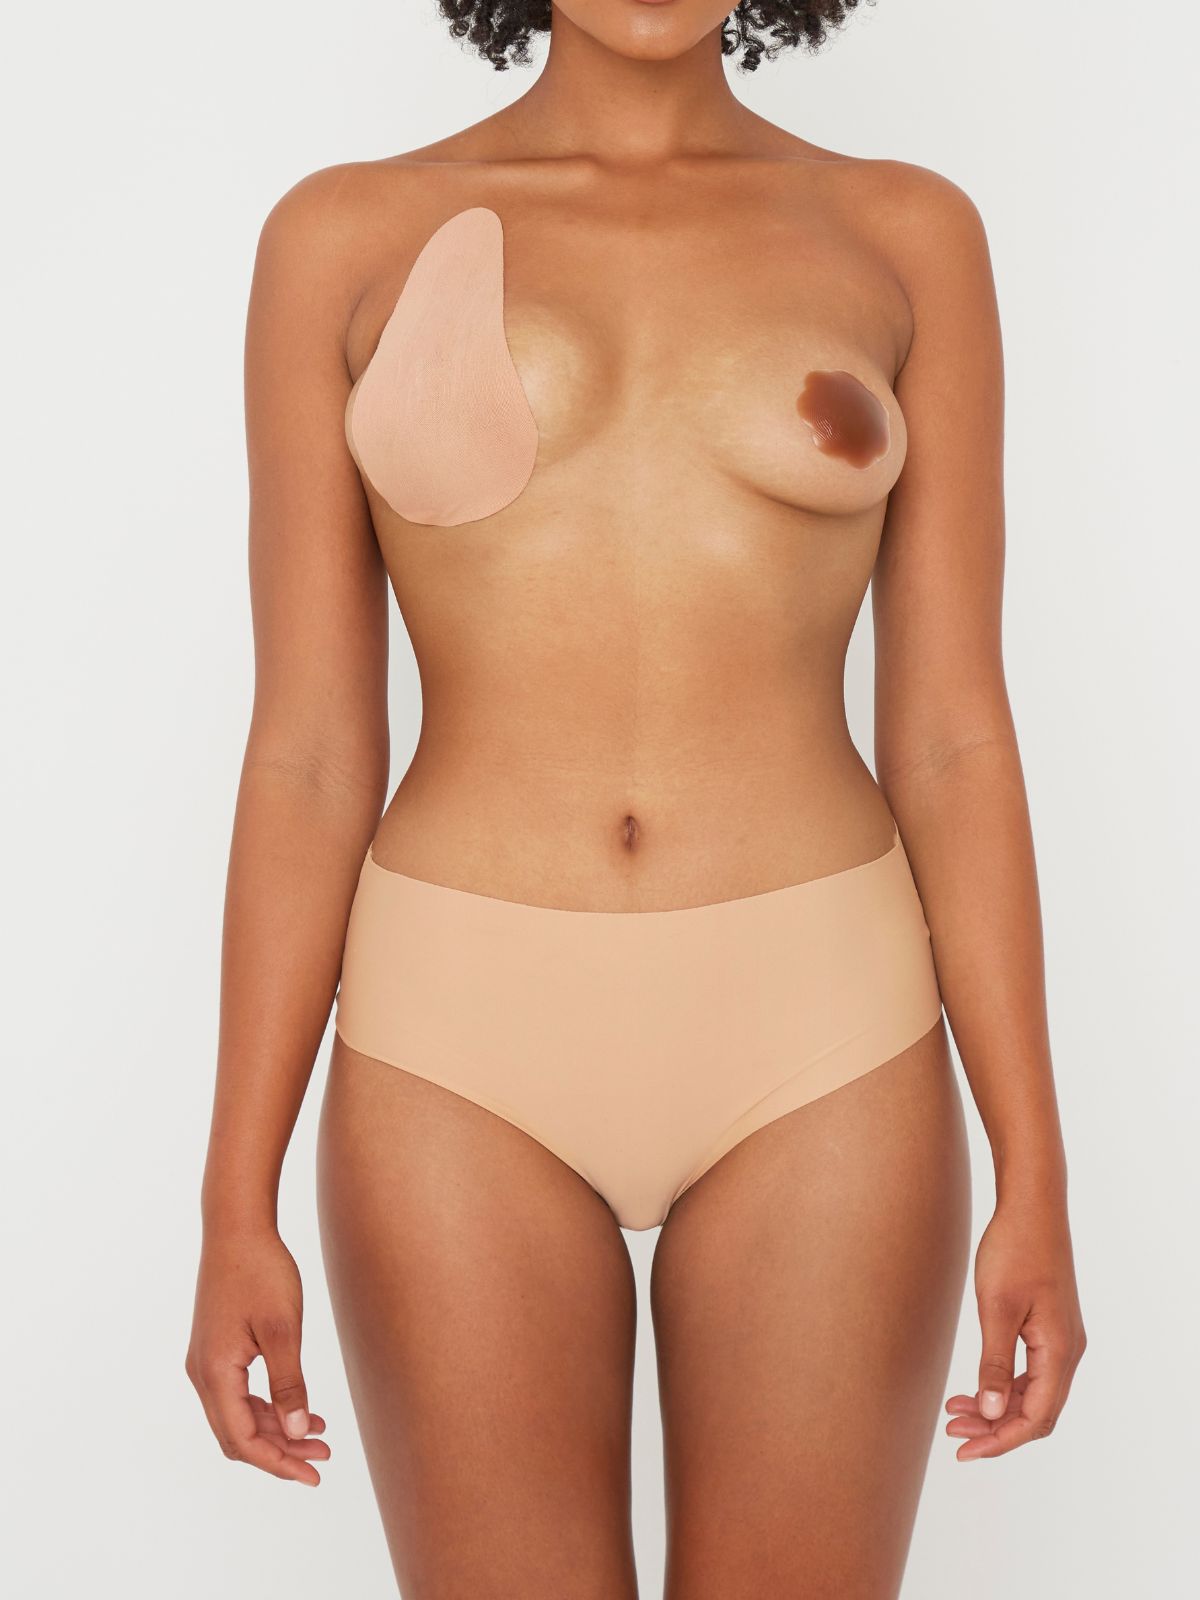 Original Lift and Shape Tape by Perky Pear / Beige